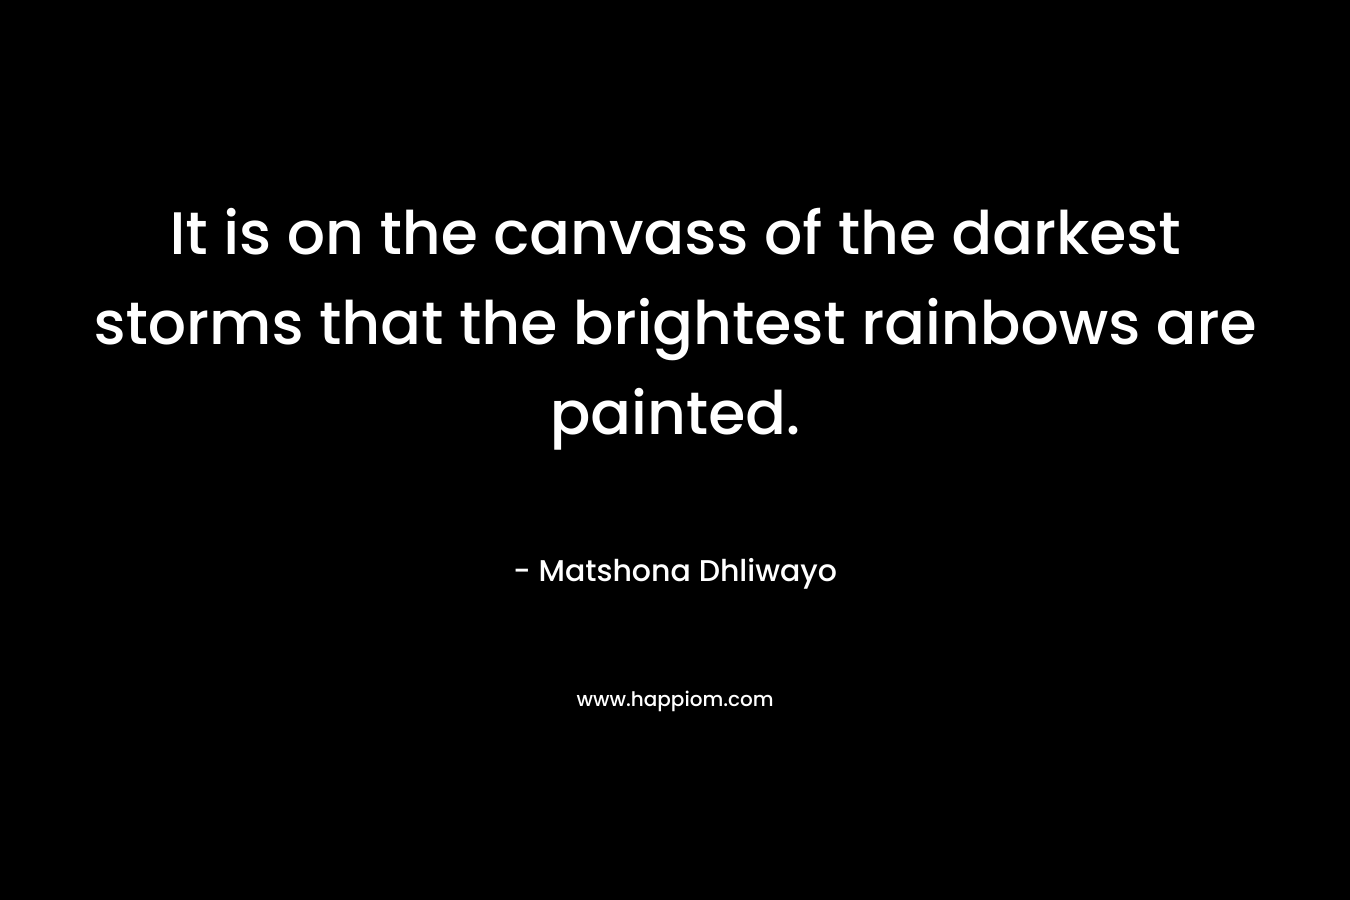 It is on the canvass of the darkest storms that the brightest rainbows are painted.